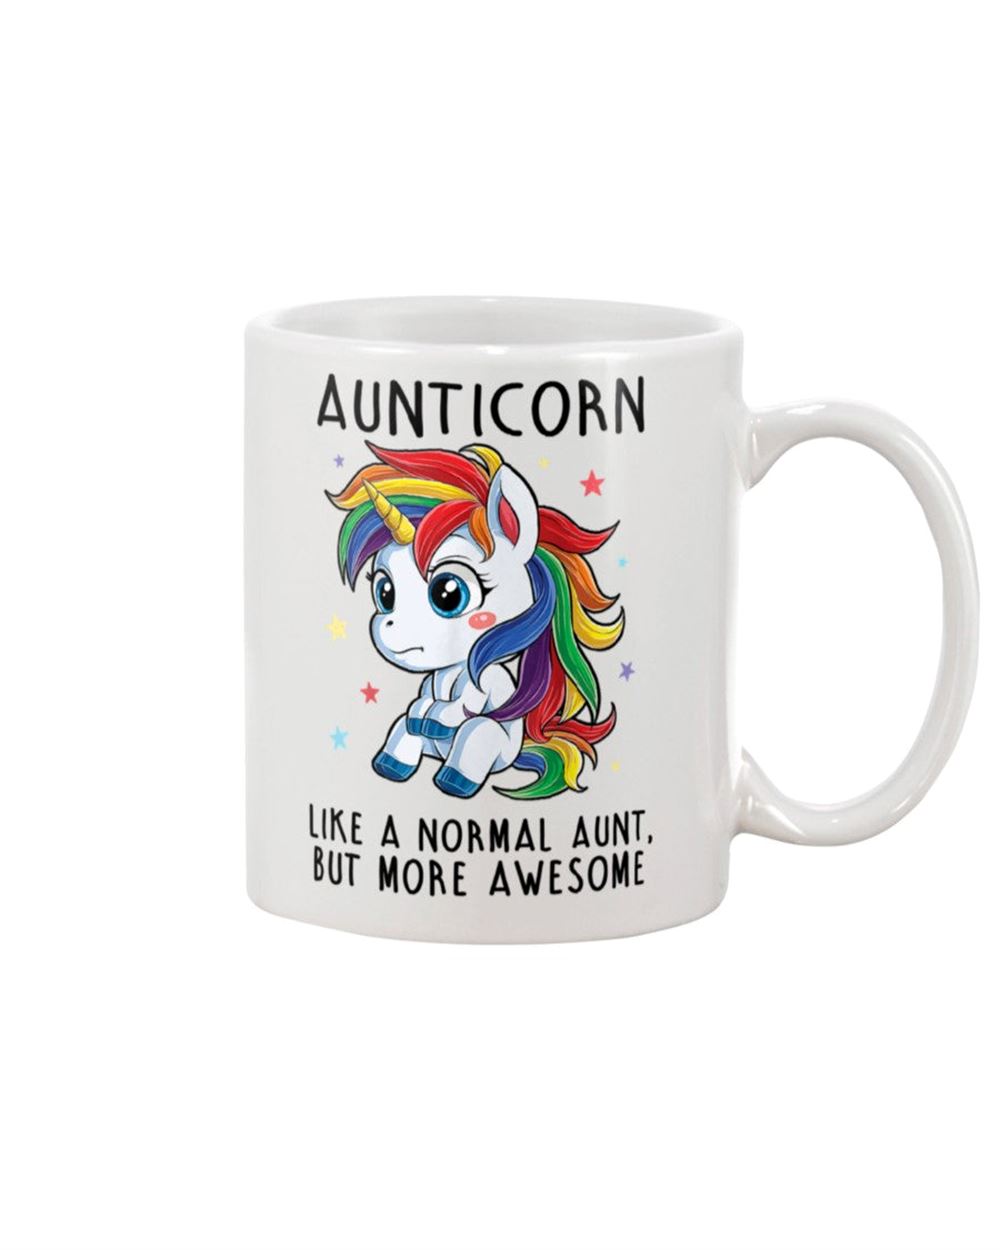 Aunticorn Like A Normal Aunt But More Awesome Mug